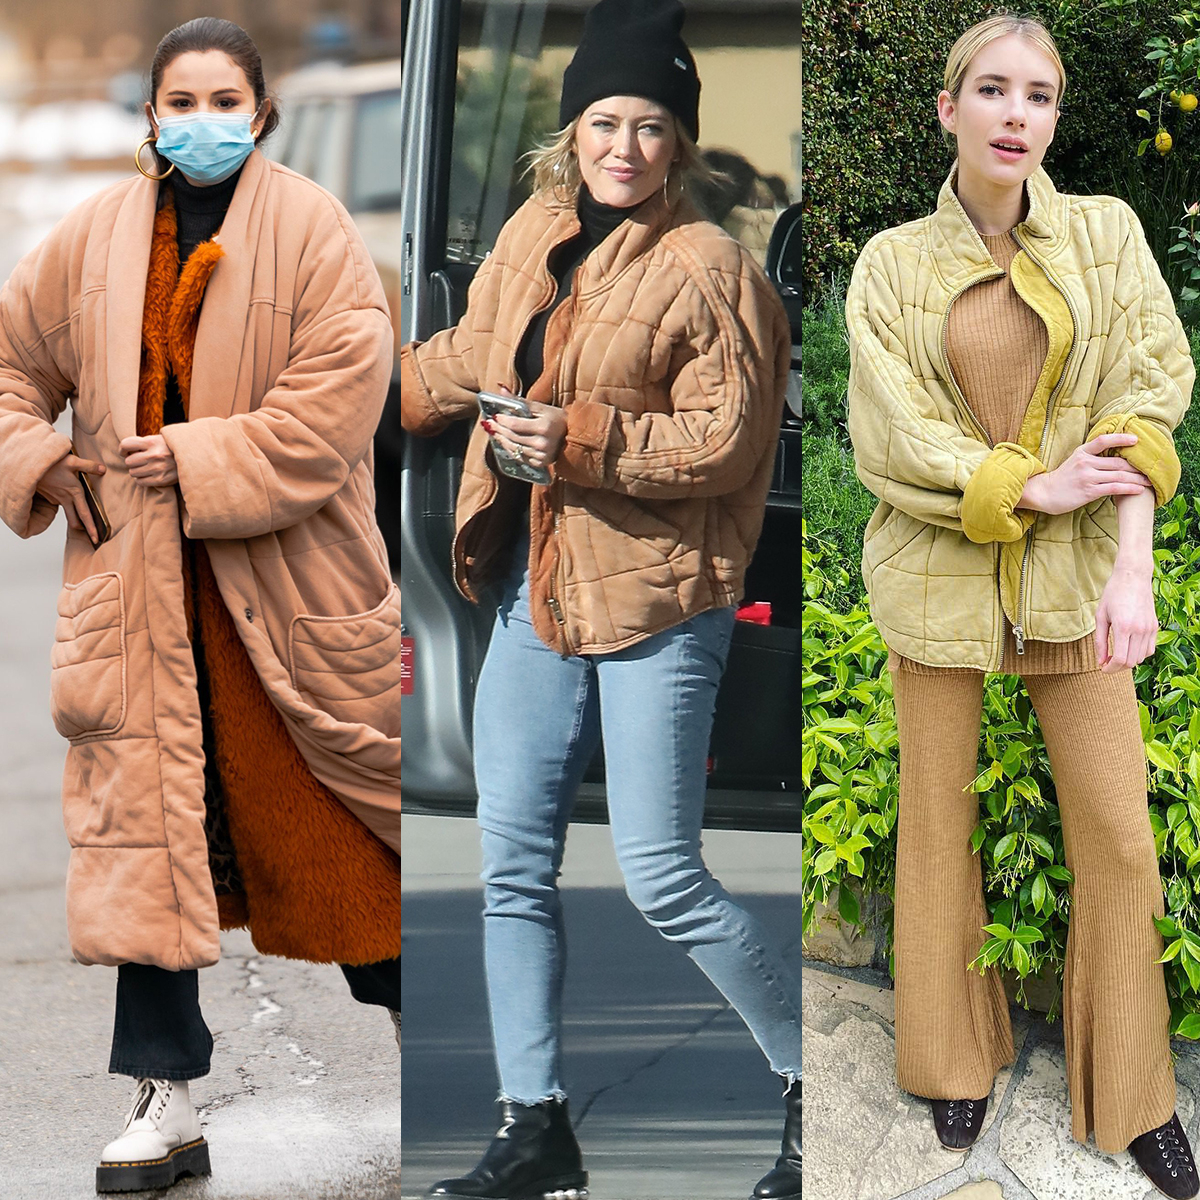 Get the Free People Movement gear loved by celebs like Addison Rae